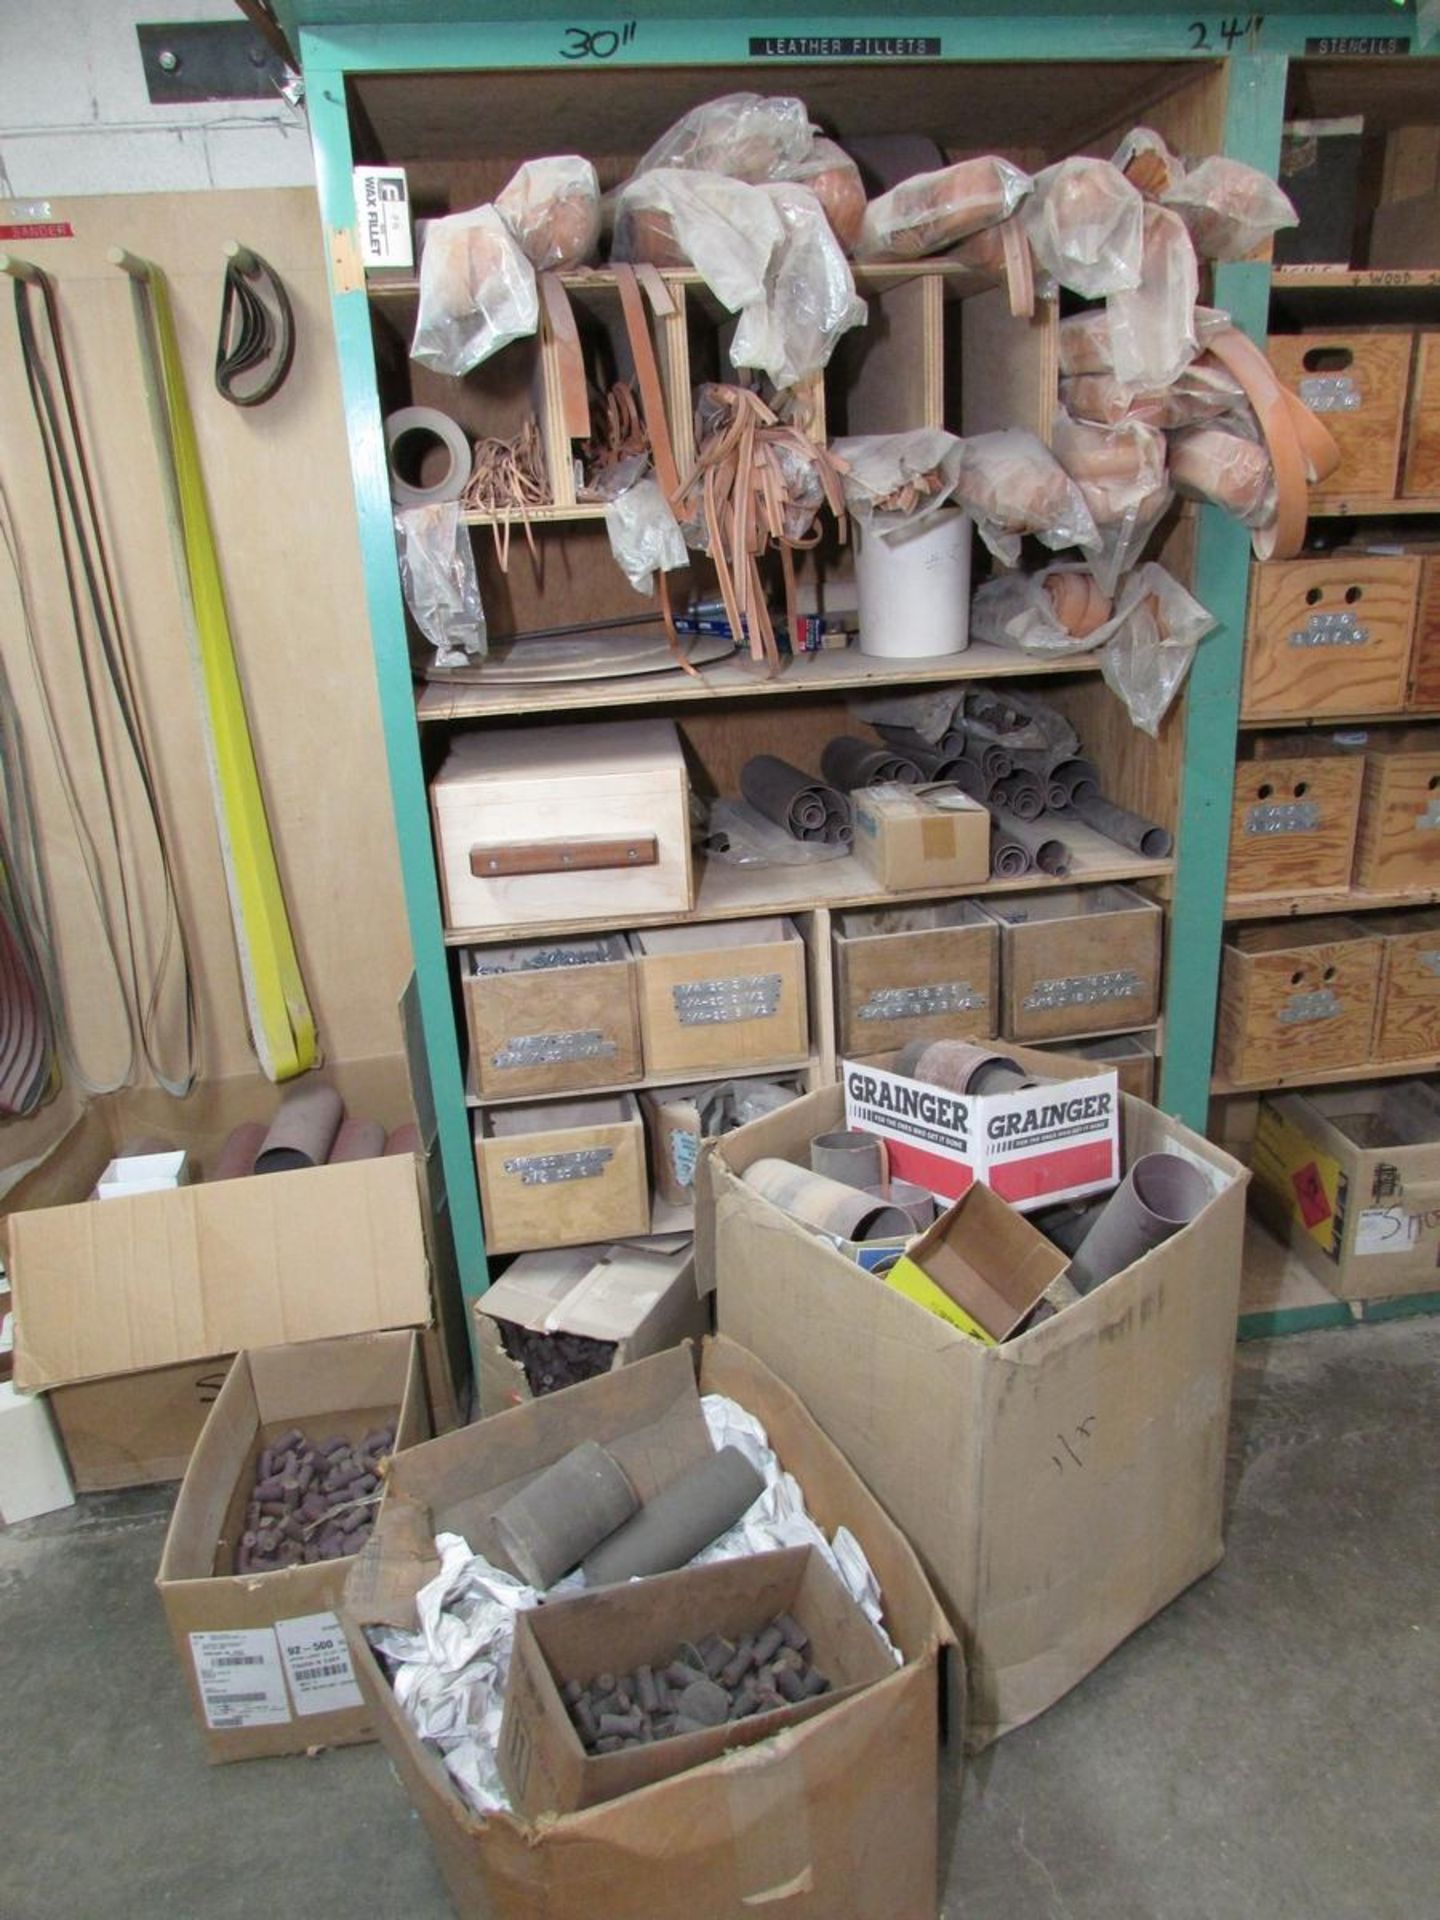 Remaining Contents of Storage Room - Image 6 of 9